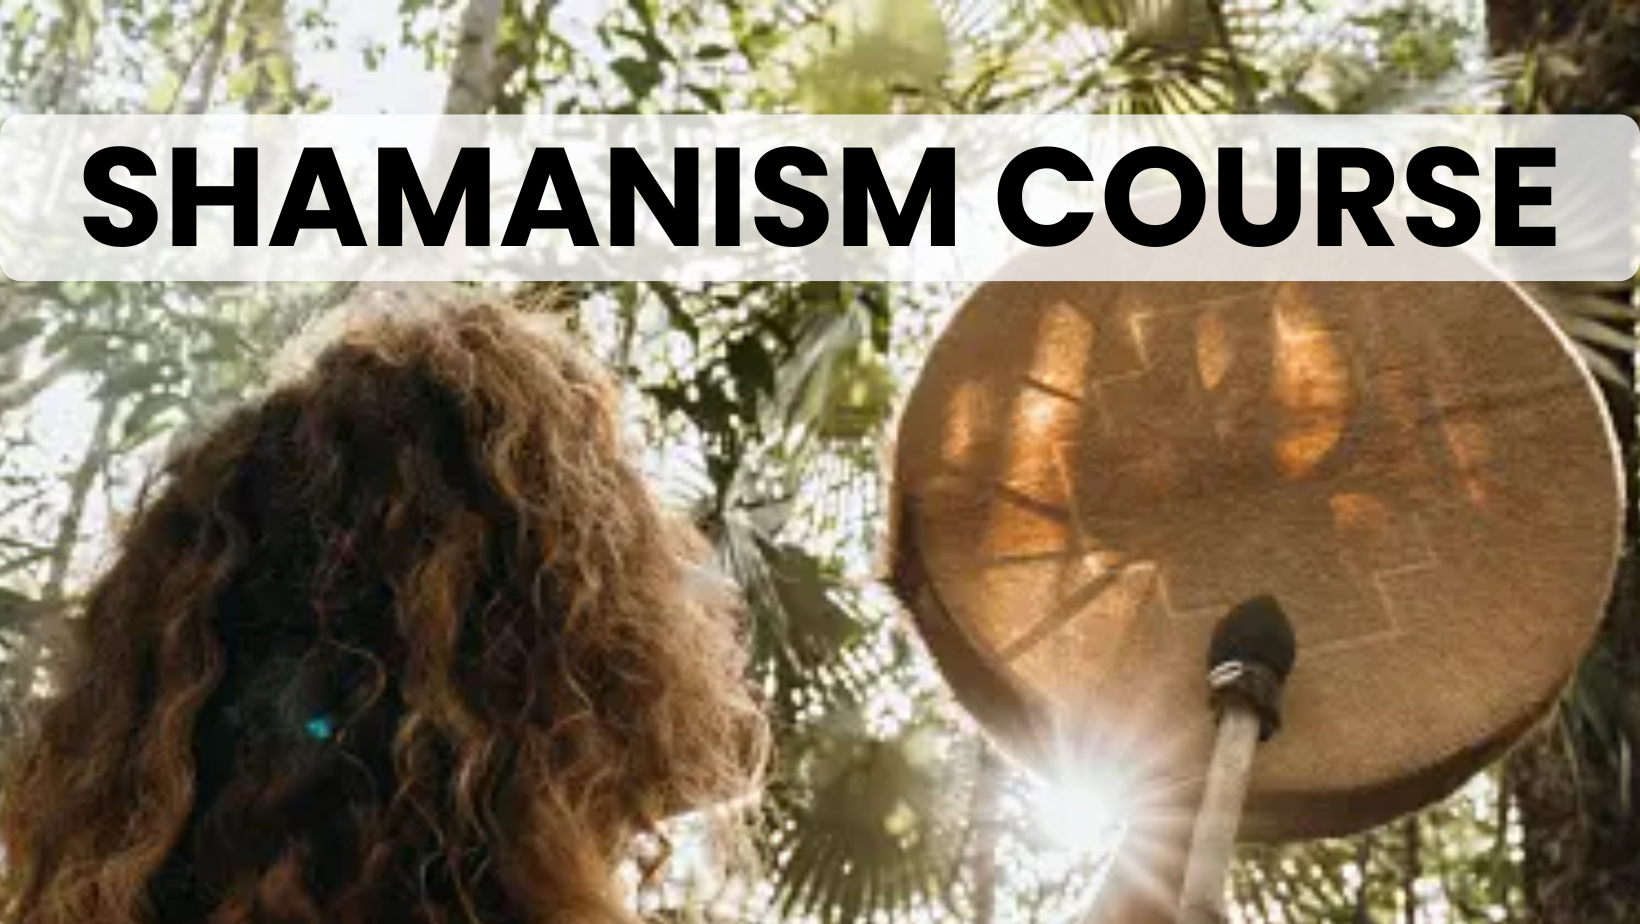 Shamanism Courses in Chandigarh